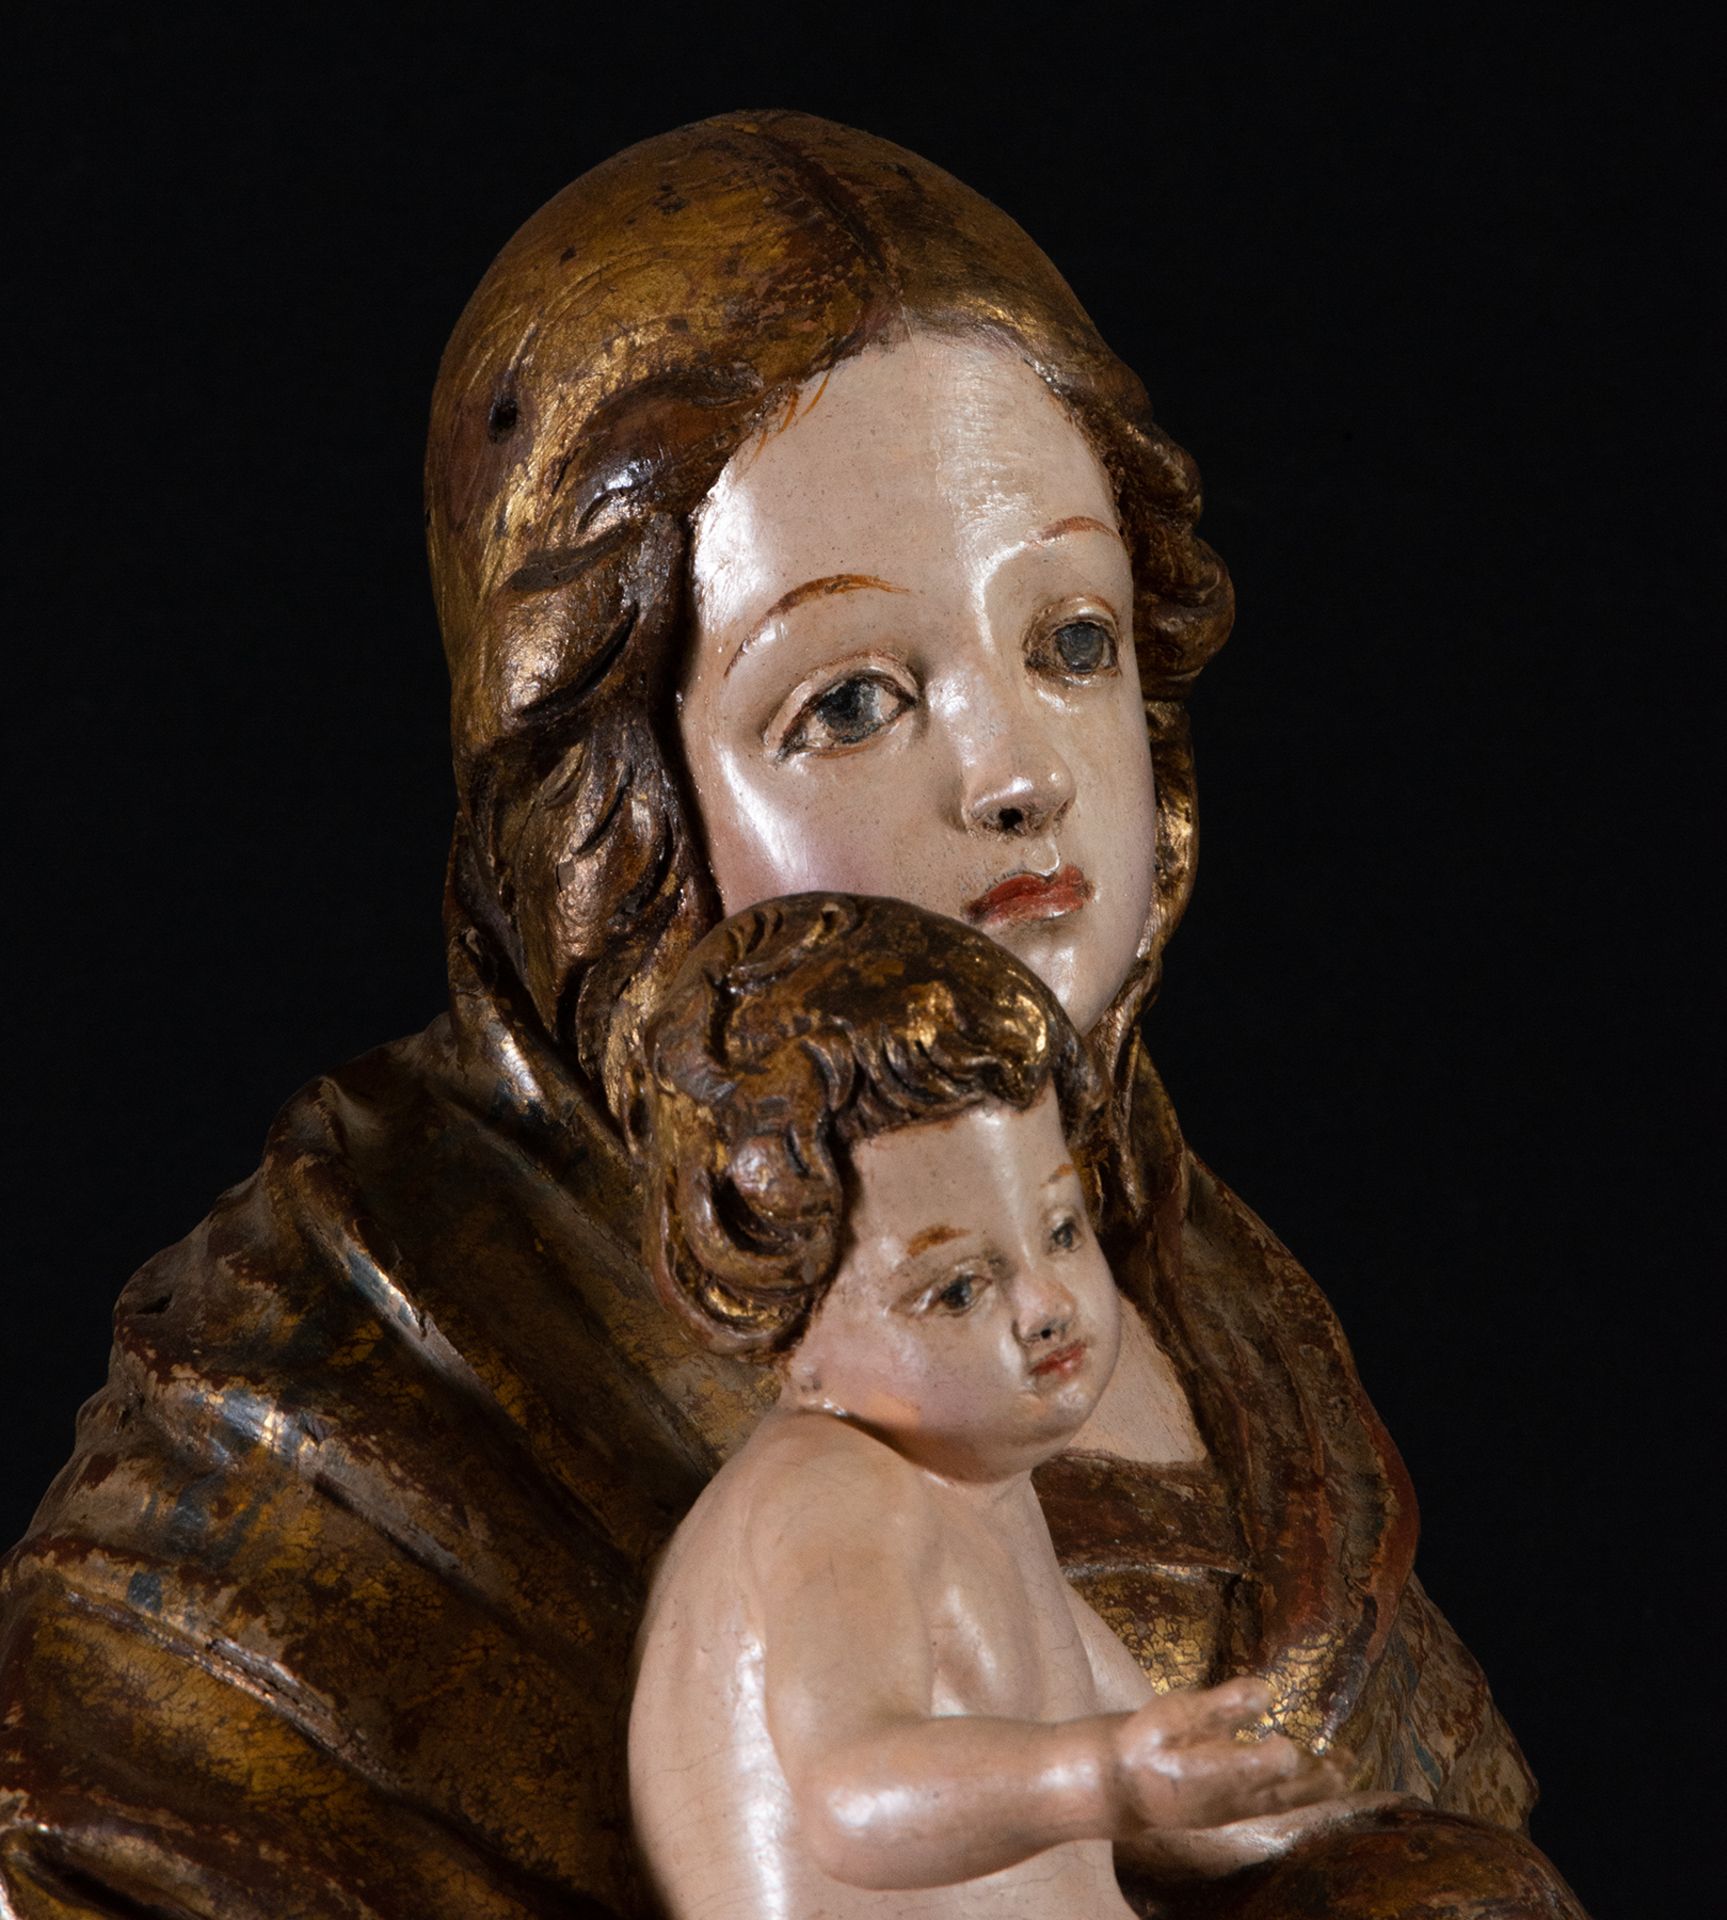 Spectacular Large Virgin with Child in her arms in wood carving, Romanist school of the 16th century - Image 8 of 9